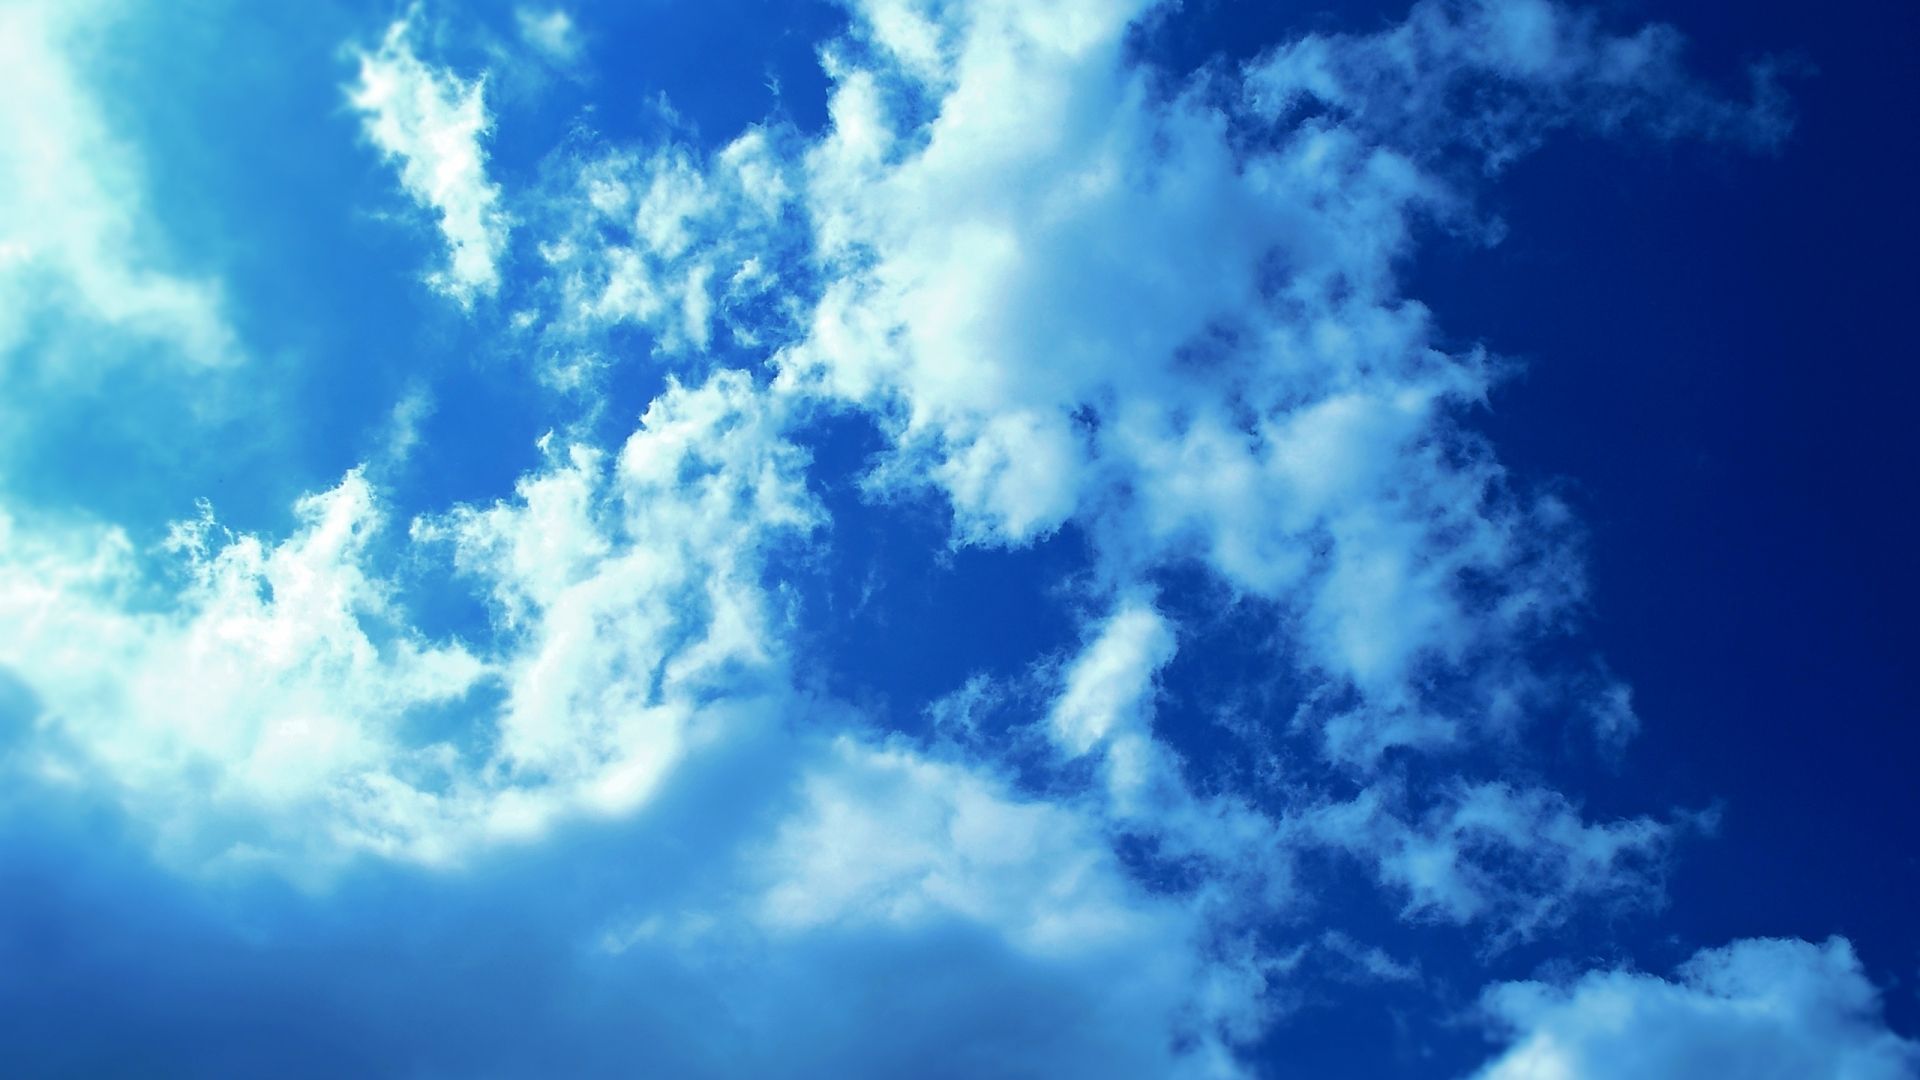 Free download Blue clouds wallpaper and image wallpaper picture photo [2560x1600] for your Desktop, Mobile & Tablet. Explore Blue Clouds Wallpaper. Blue Sky Wallpaper, Blue Sky and Clouds Wallpaper